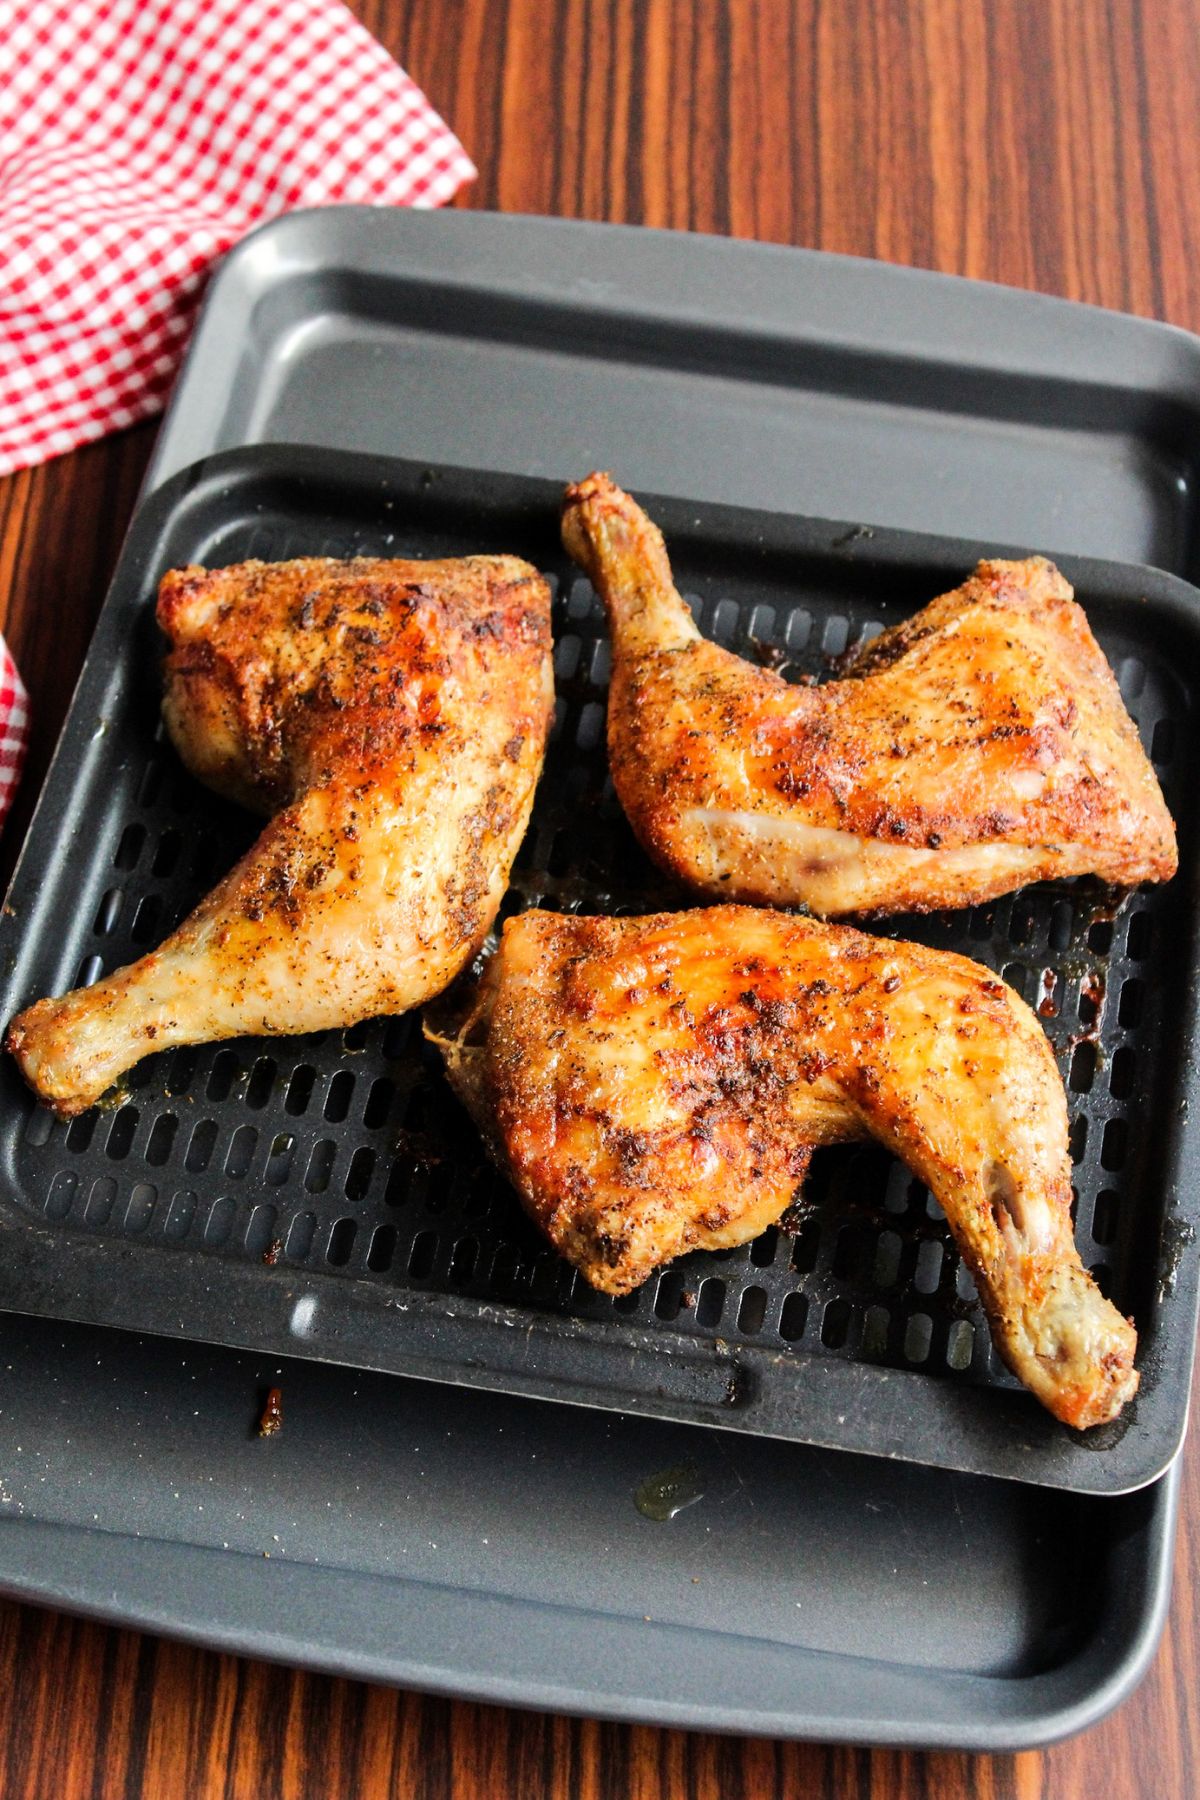 Chicken coming out of the air fryer